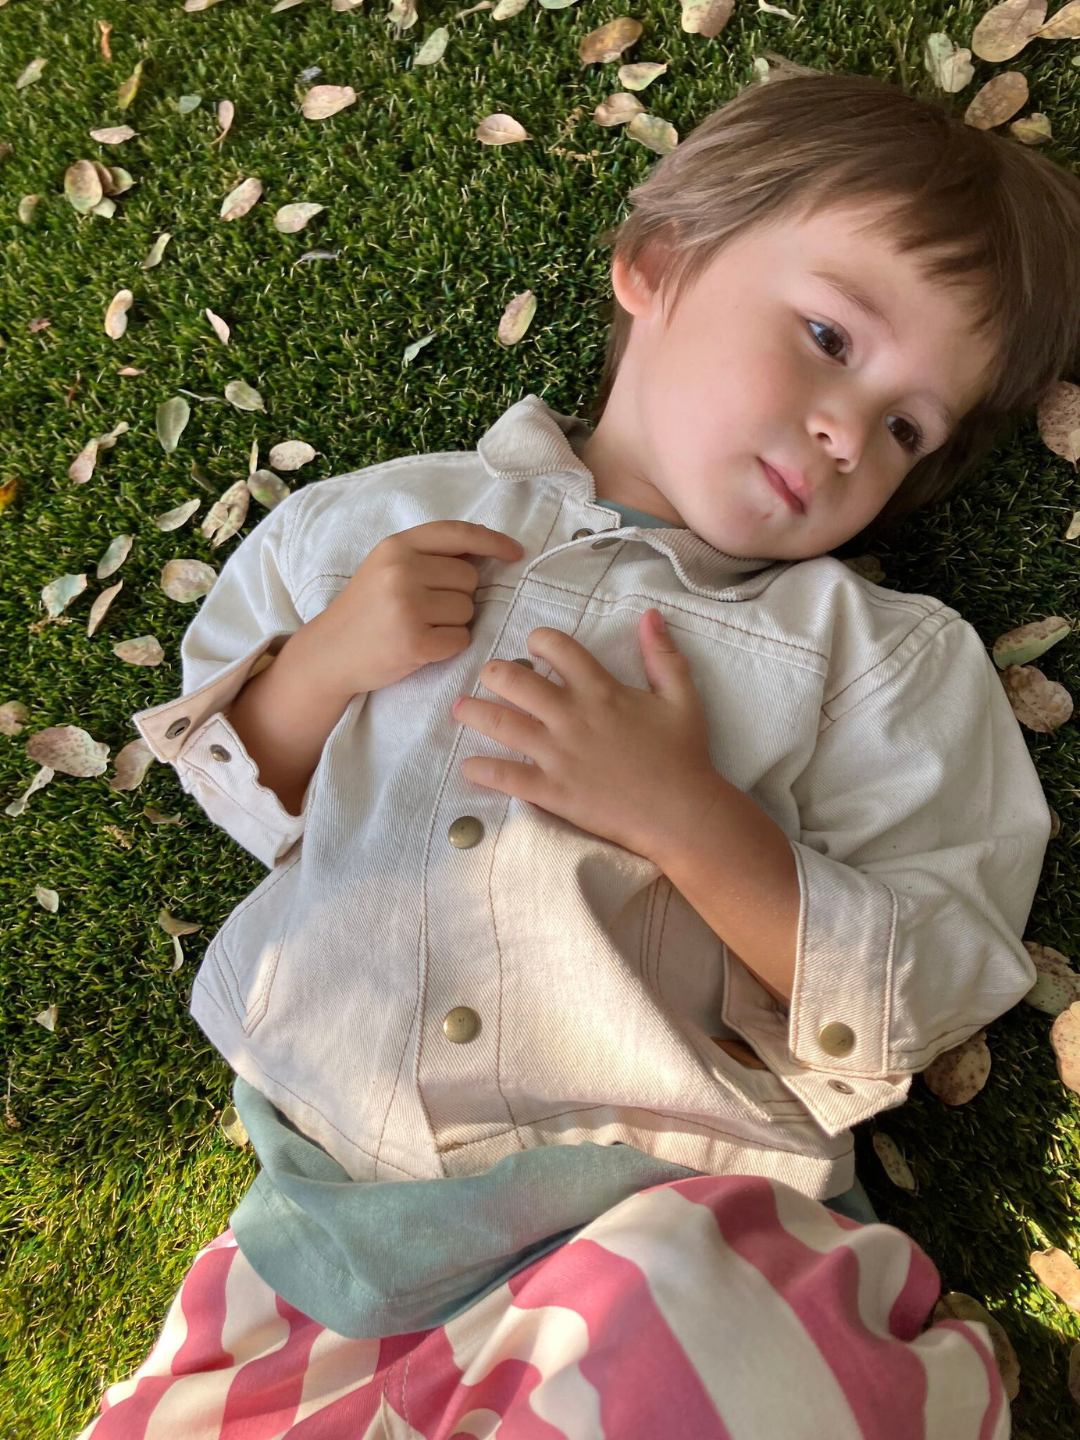 Natural | A kid laying on grass, wearing the Weekender Jacker in Natural.